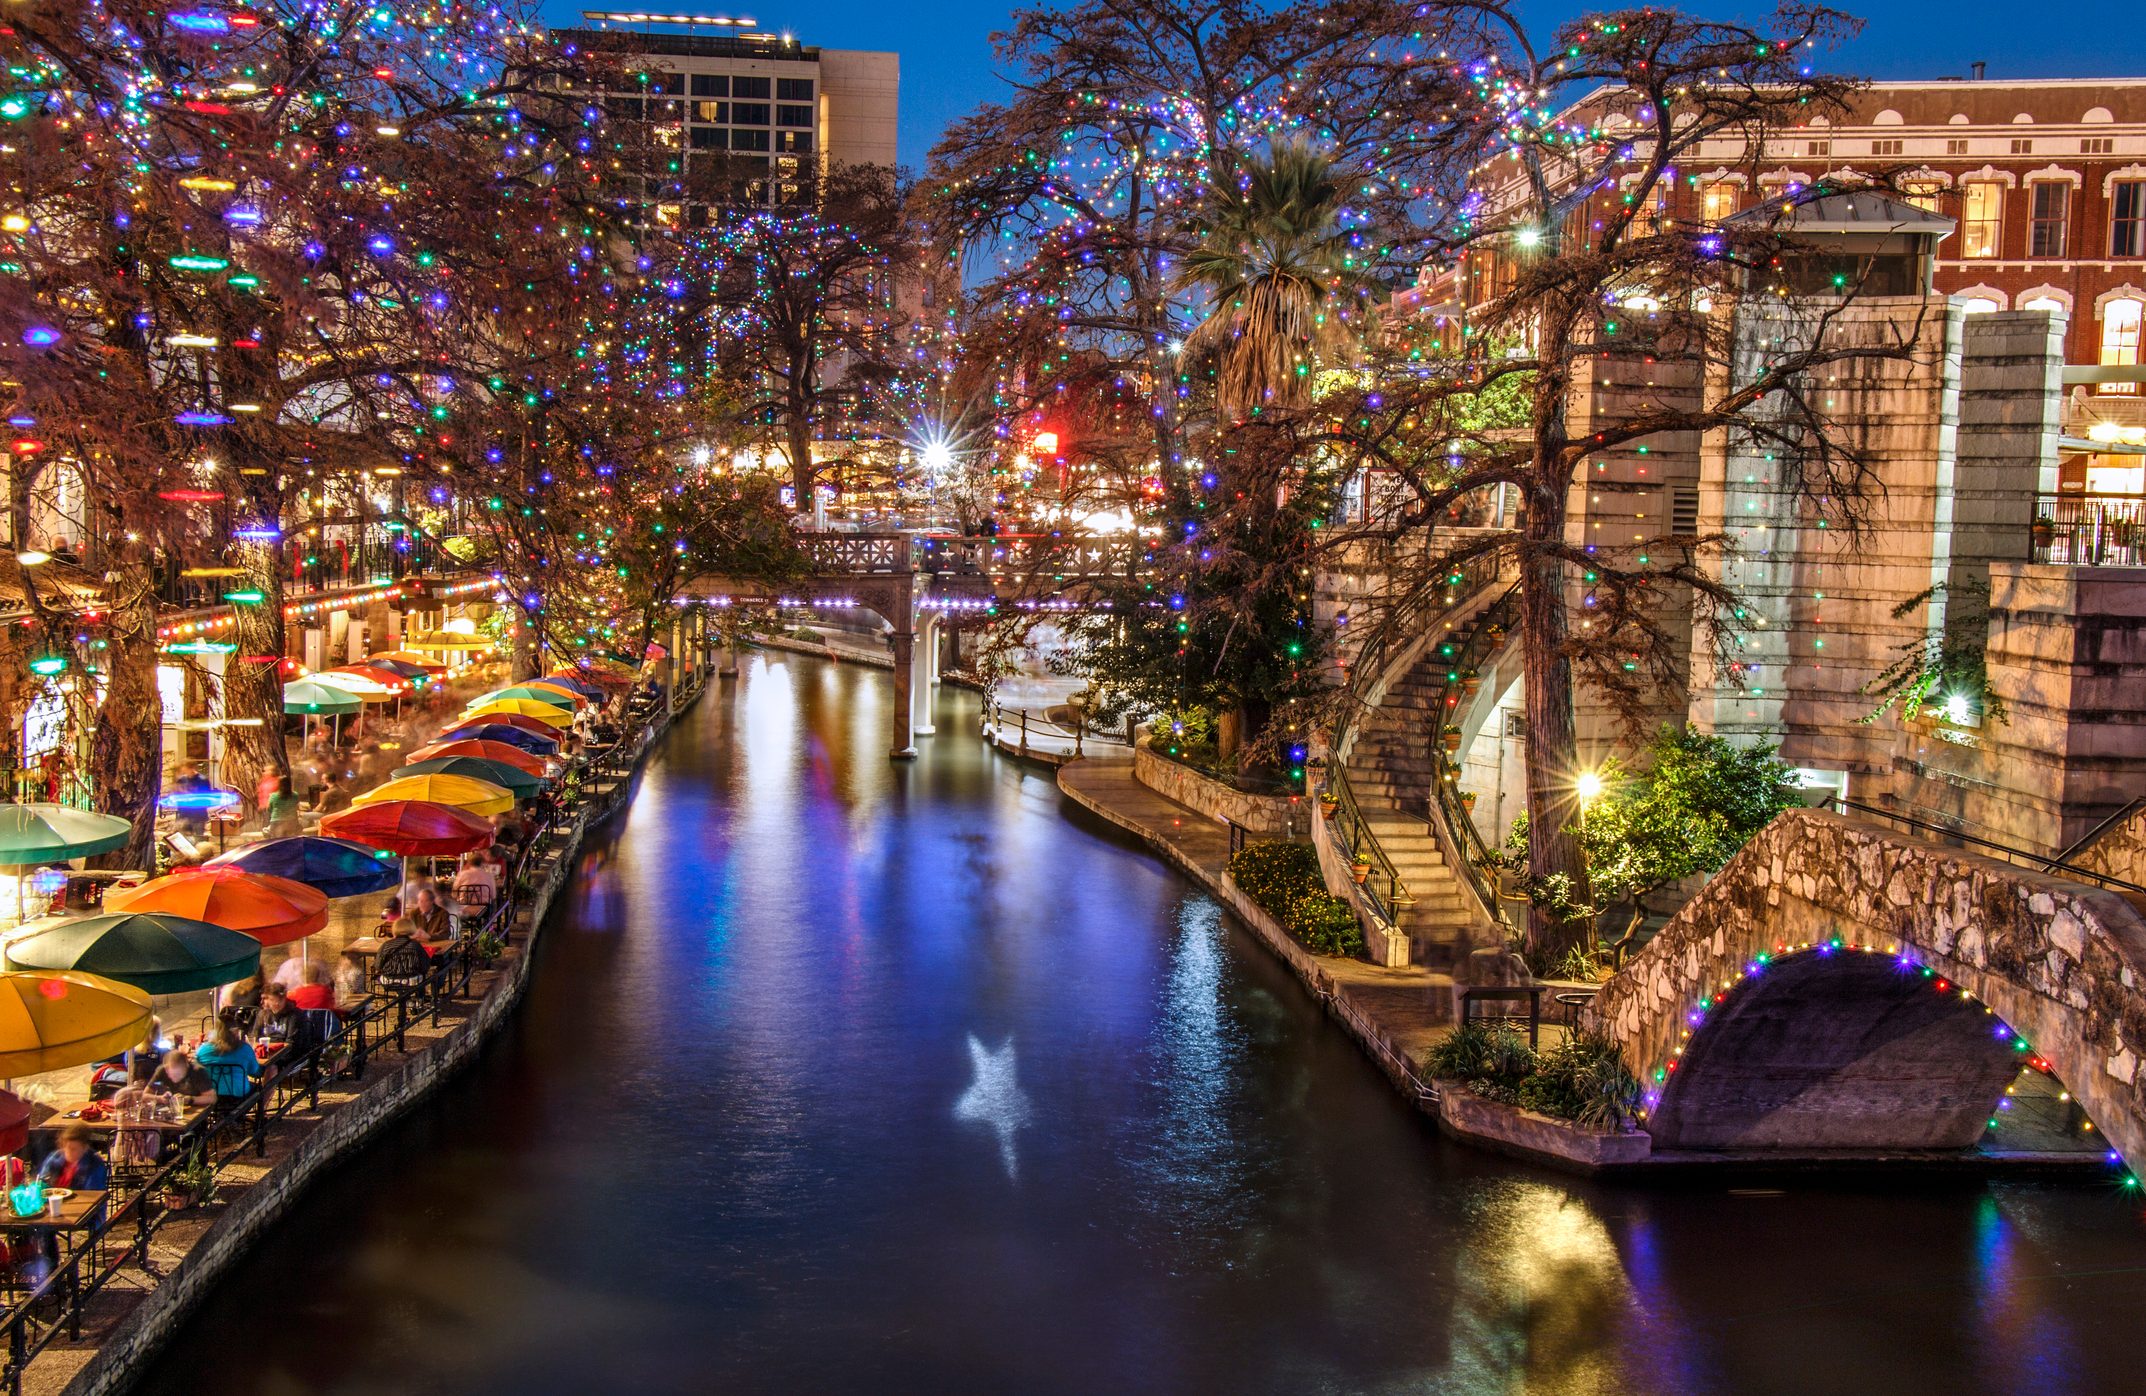 <p><strong>Best for:</strong> Riverside strolls</p> <p>San Antonio stands out as one of the best Christmas towns for the unparalleled setting of its River Walk, decorated for the holidays with thousands of lights hung on the bald cypress trees that line the river. The season kicks off with a Holiday River Parade of floats on boats along the river; then the illuminated River Walk is open (and free) nightly. Visitors can also book a caroling boat and belt out their favorite Christmas tunes; or enjoy them from the riverside. The San Antonio Botanical Gardens also have amazing illuminations with their Lightscape walking event, featuring lights set among the gardens as well as a "Cathedral of Light," 100,000 bulbs in a glorious archway. Food, drinks, and s'mores round out the festivities.</p> <p>Stay at the historic 1859 hotel The Menger, with an awesome location one block from the River Walk, as well as a block from the famous Alamo. Surprisingly affordable, the property's amazing lobby atrium looks fabulous decorated for Christmas.</p> <p class="listicle-page__cta-button-shop"><a class="shop-btn" href="https://www.tripadvisor.com/Hotel_Review-g60956-d99531-Reviews-Menger_Hotel-San_Antonio_Texas.html#REVIEWS">Book Now</a></p>